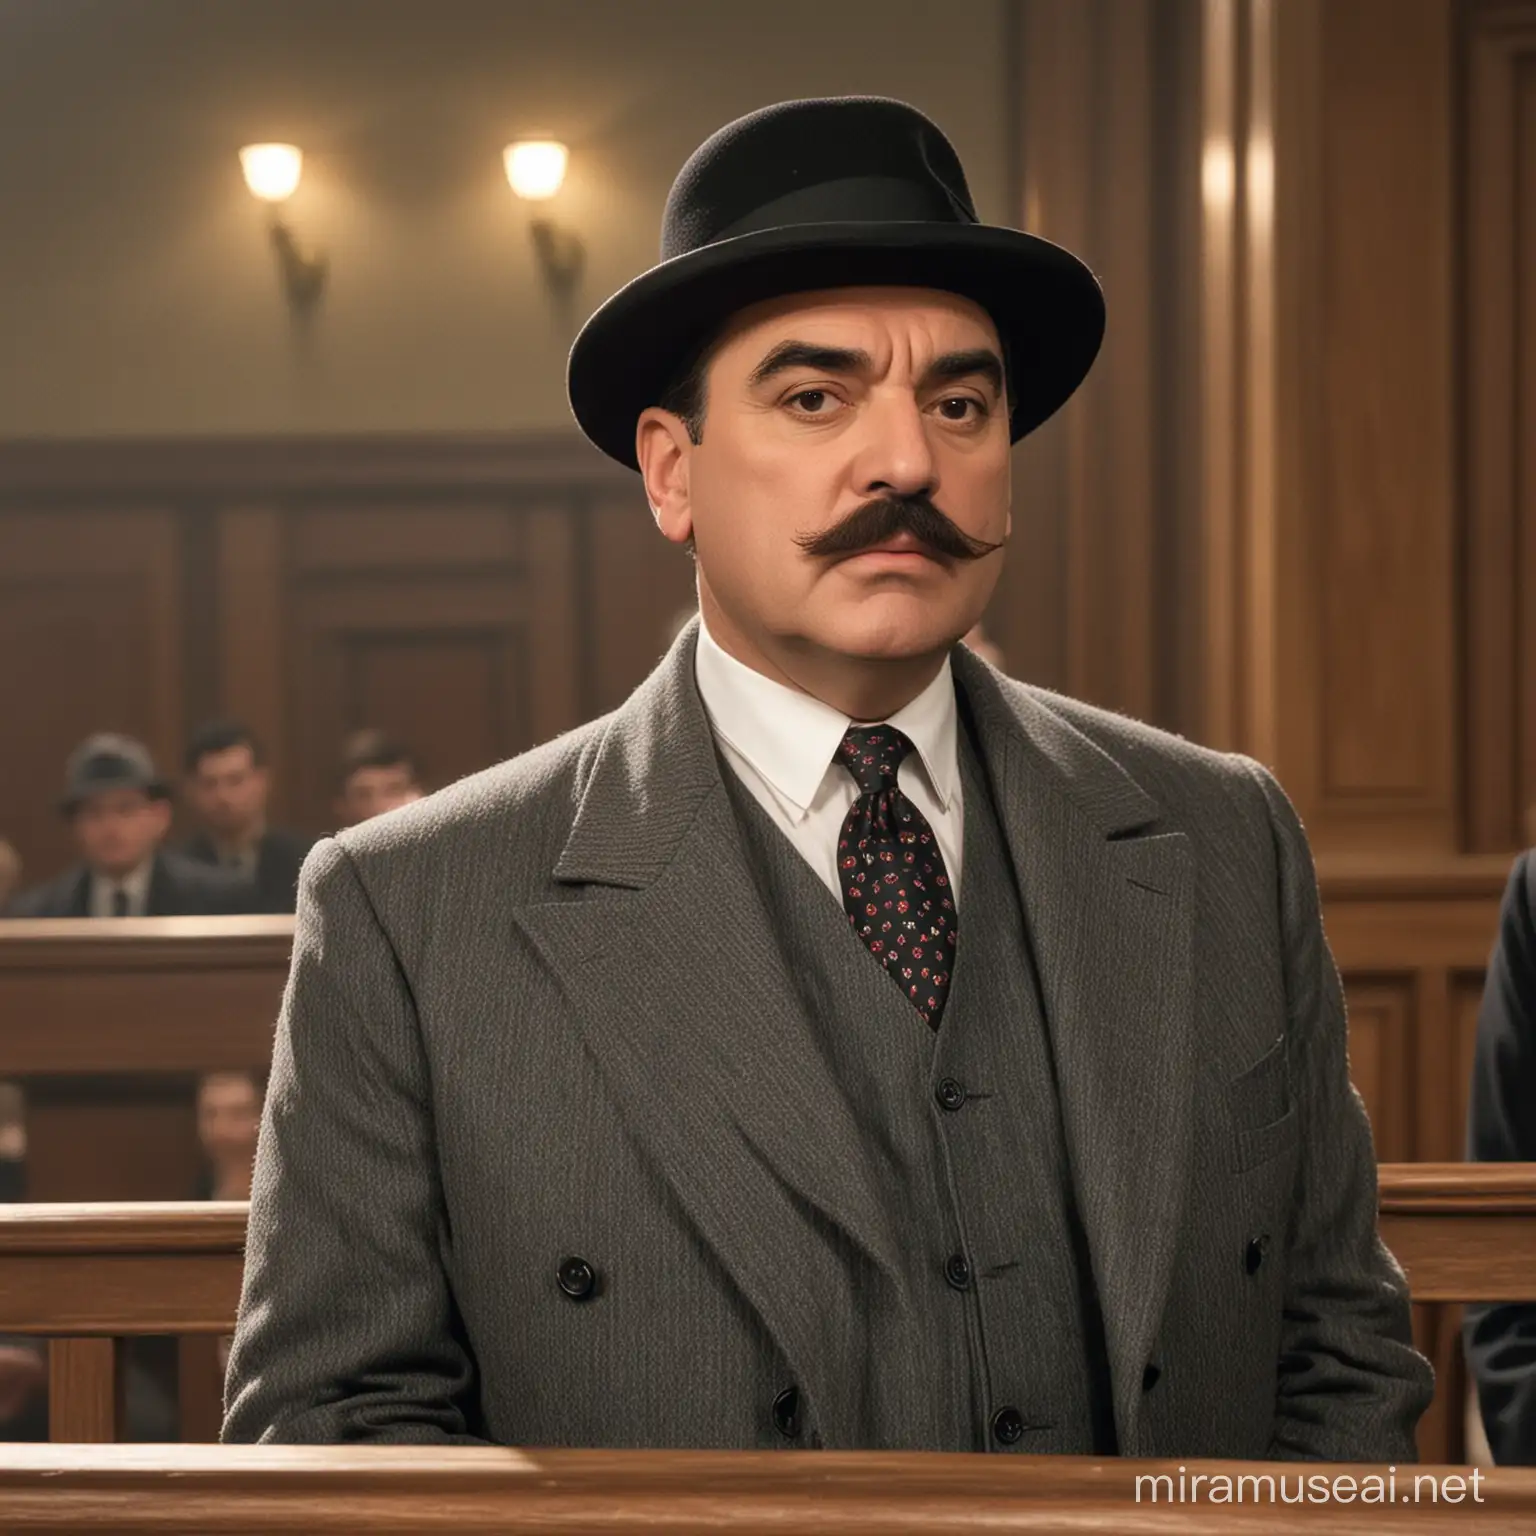 inspector poirot in the courtroom